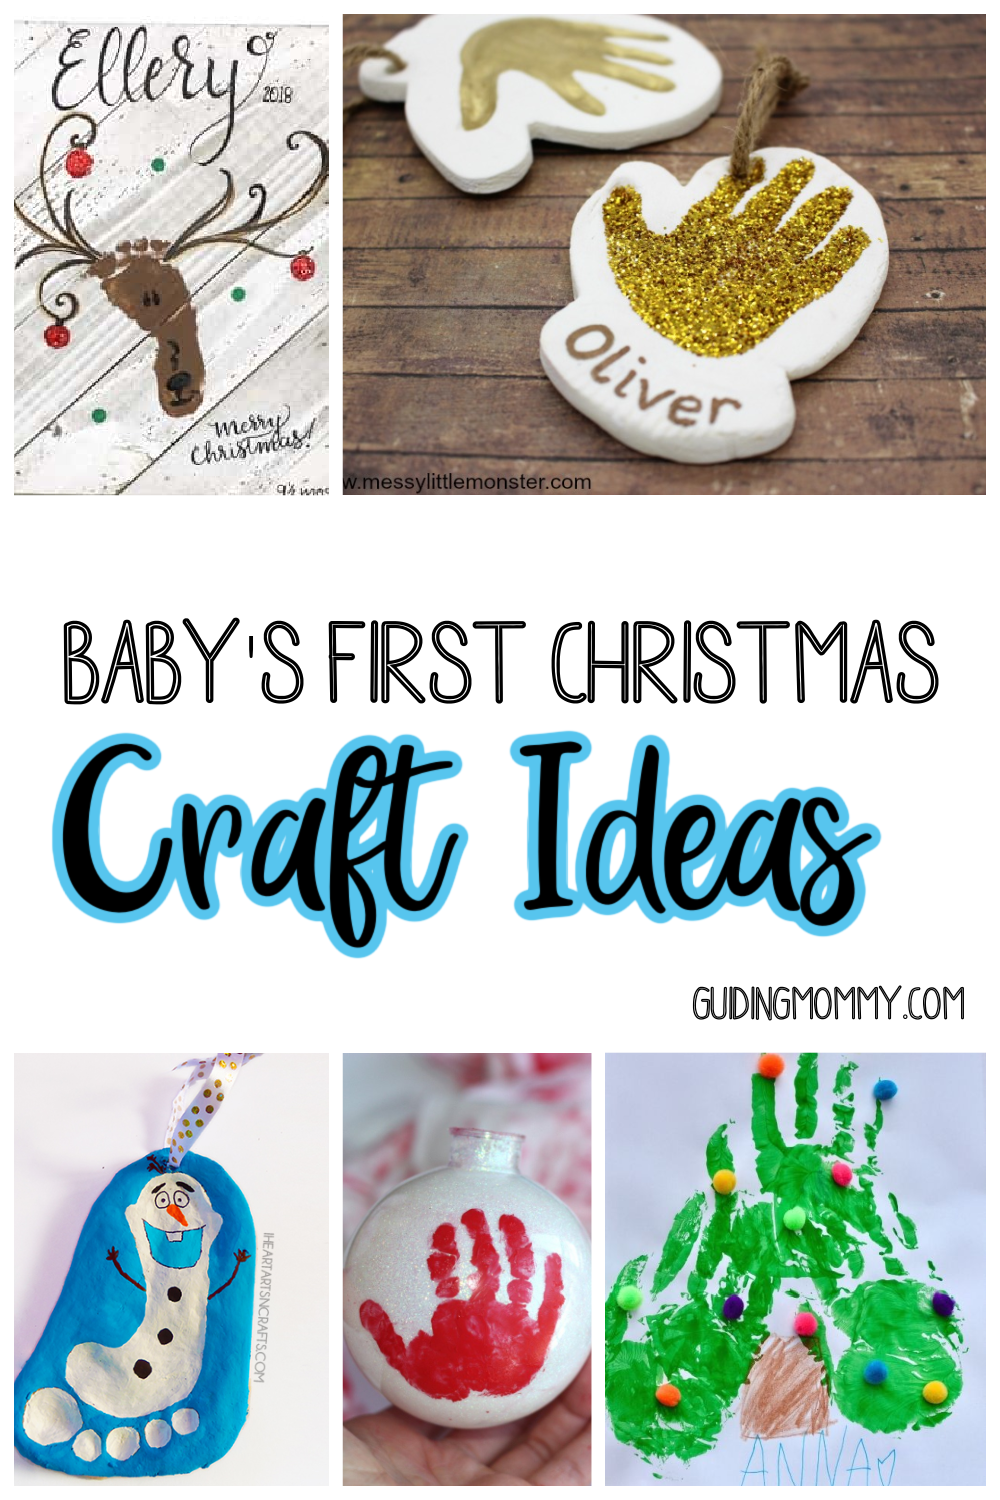 Baby's First Christmas Craft Ideas